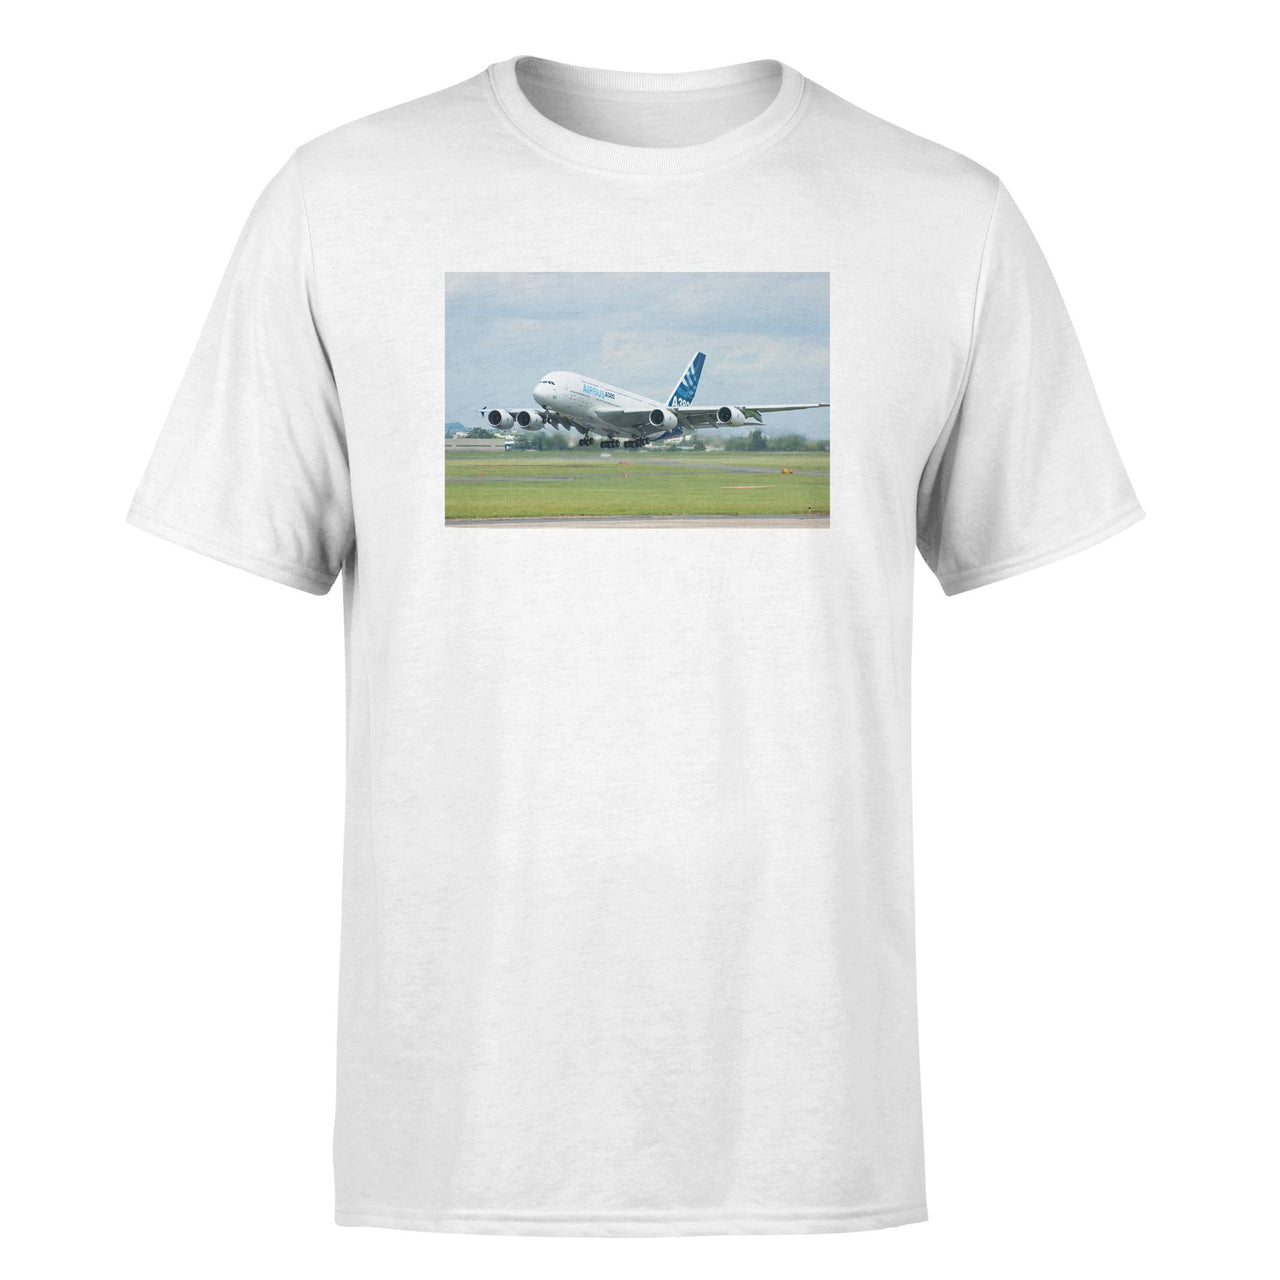 Departing Airbus A380 with Original Livery Designed T-Shirts